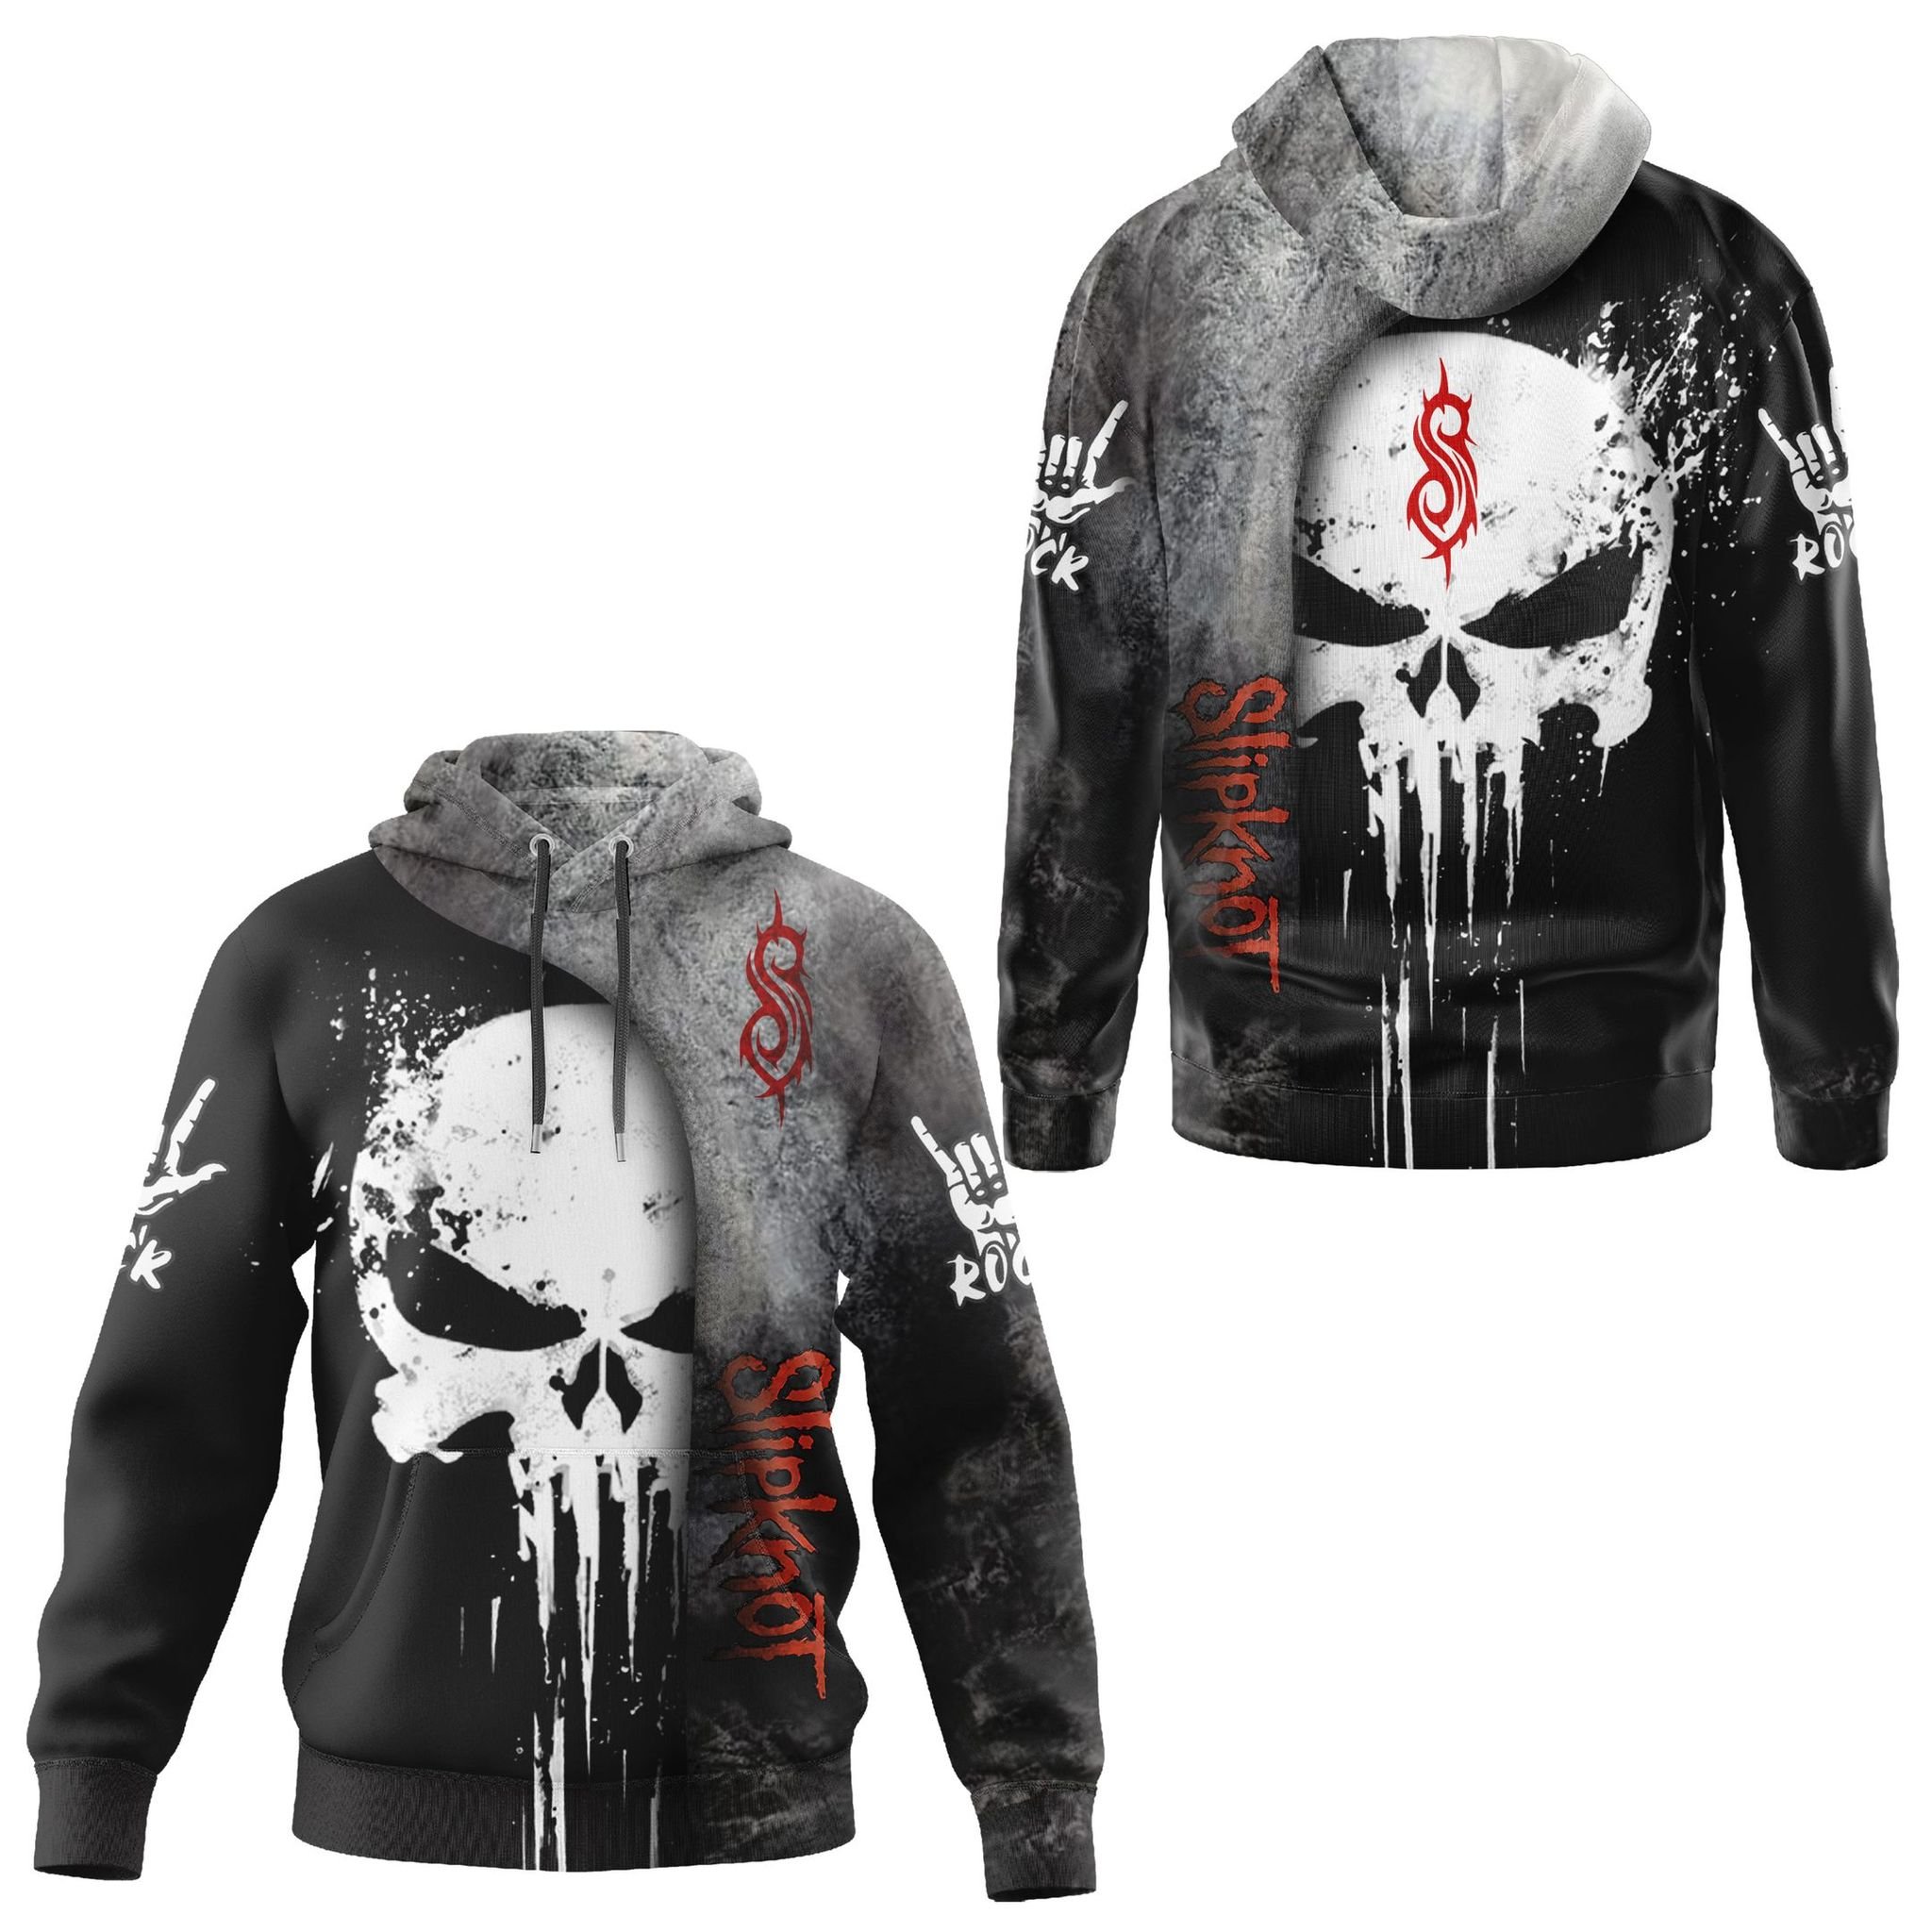 Slipknot skull 3d hoodie and shirt – LIMITED EDITION